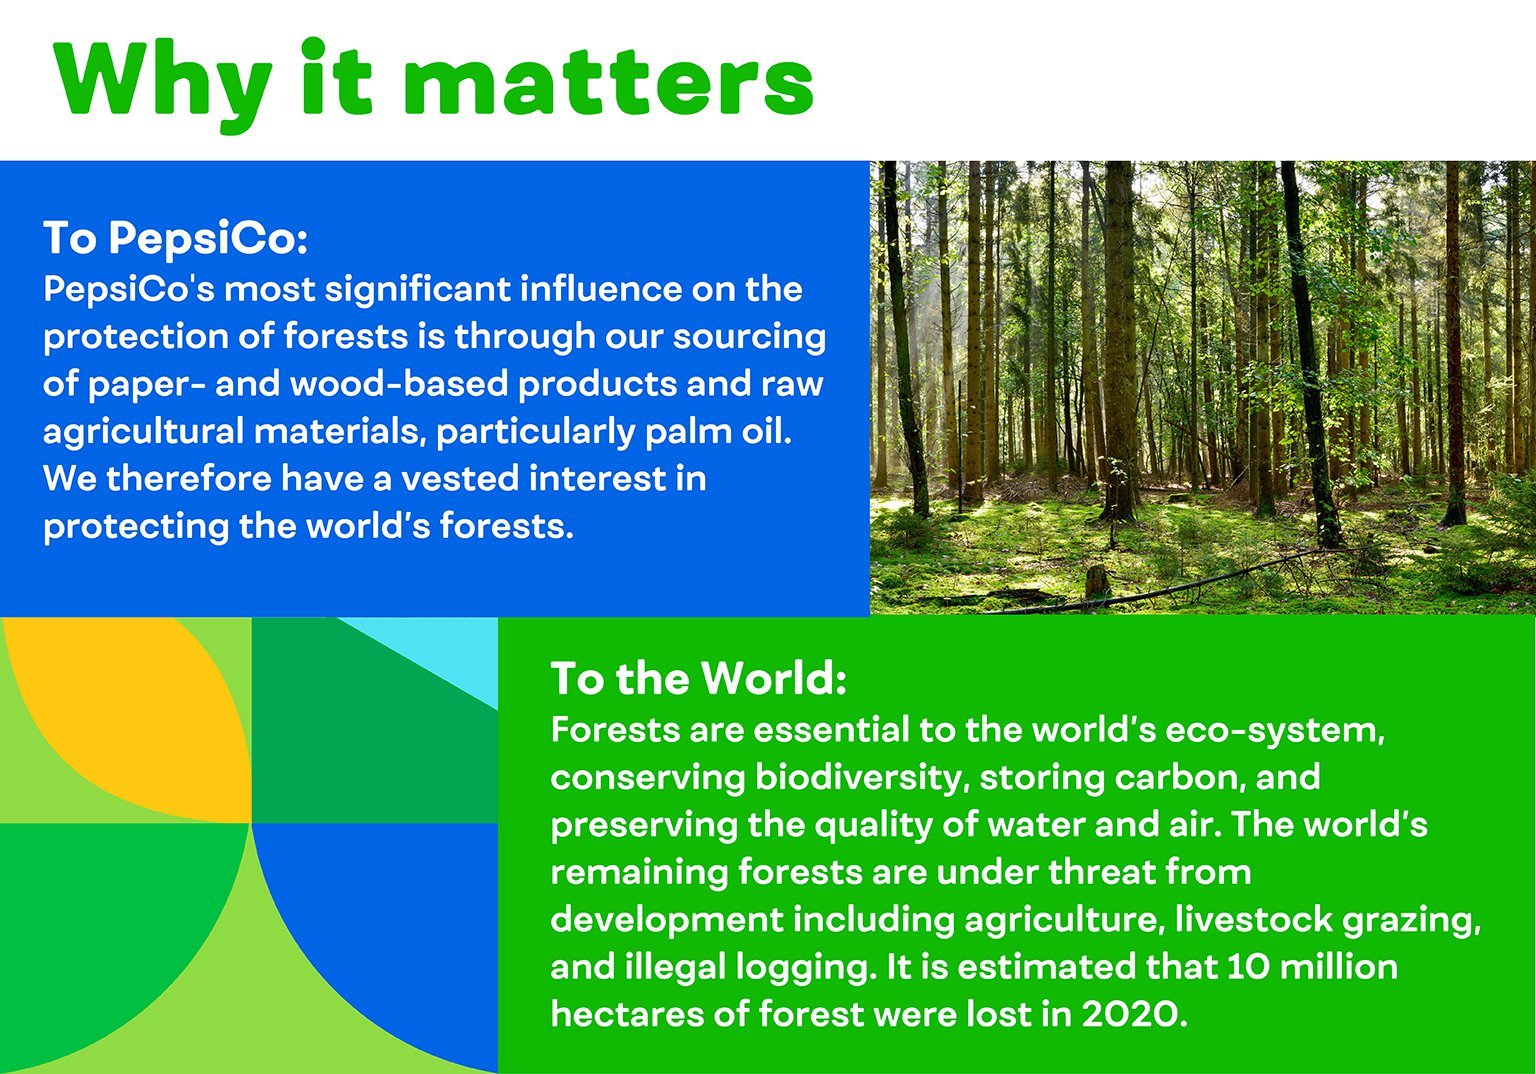 deforestation-why-it-matters